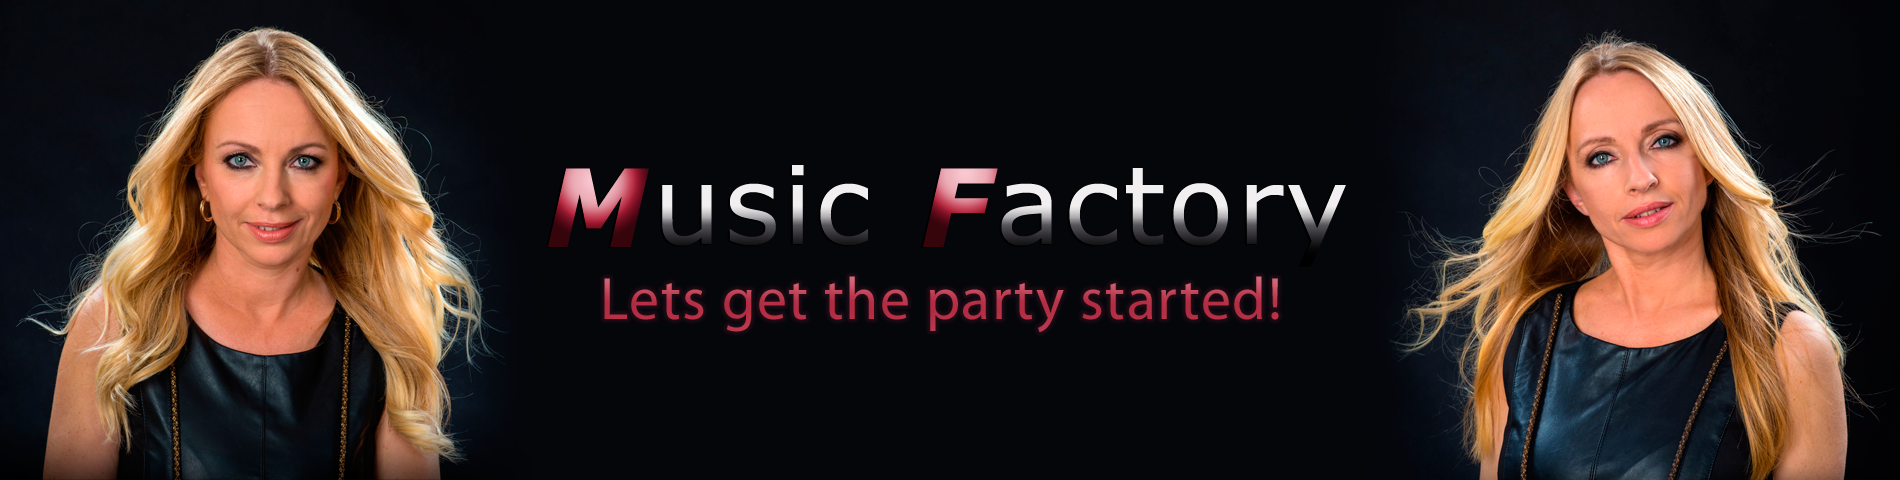 Music Factory - Lets get the party started!